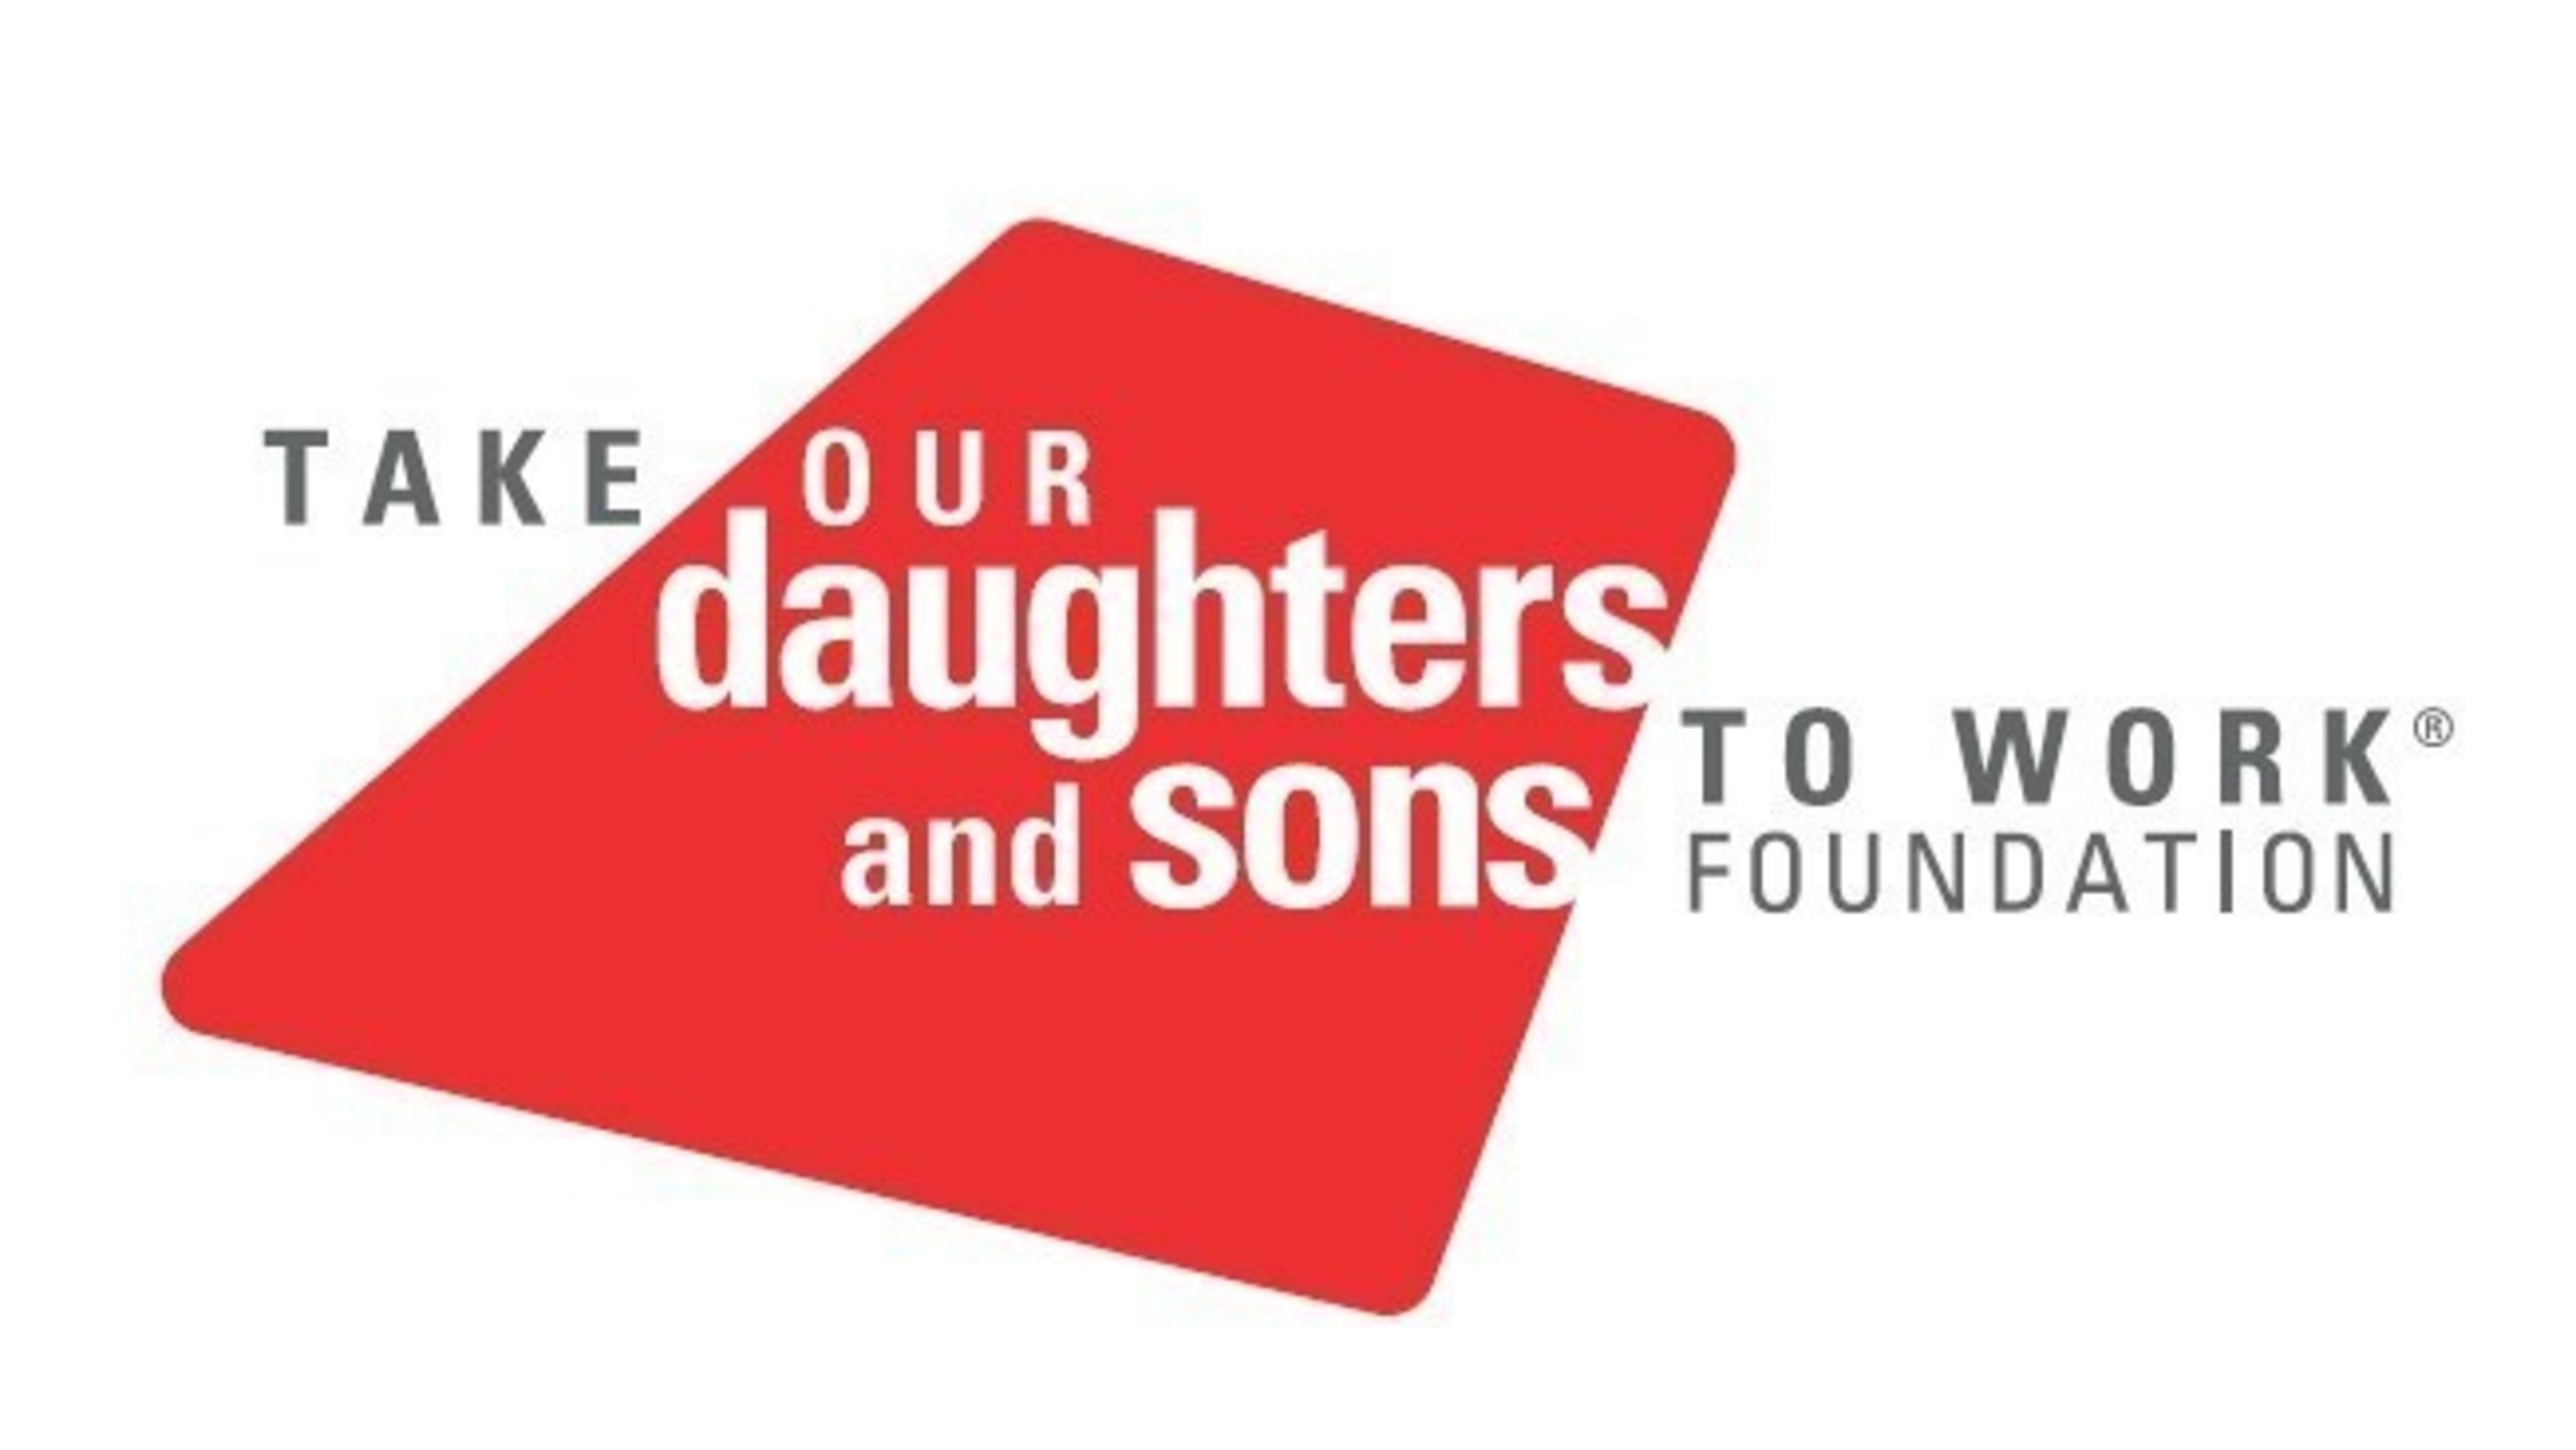 Take Our Daughters and Sons to Work Foundation logo